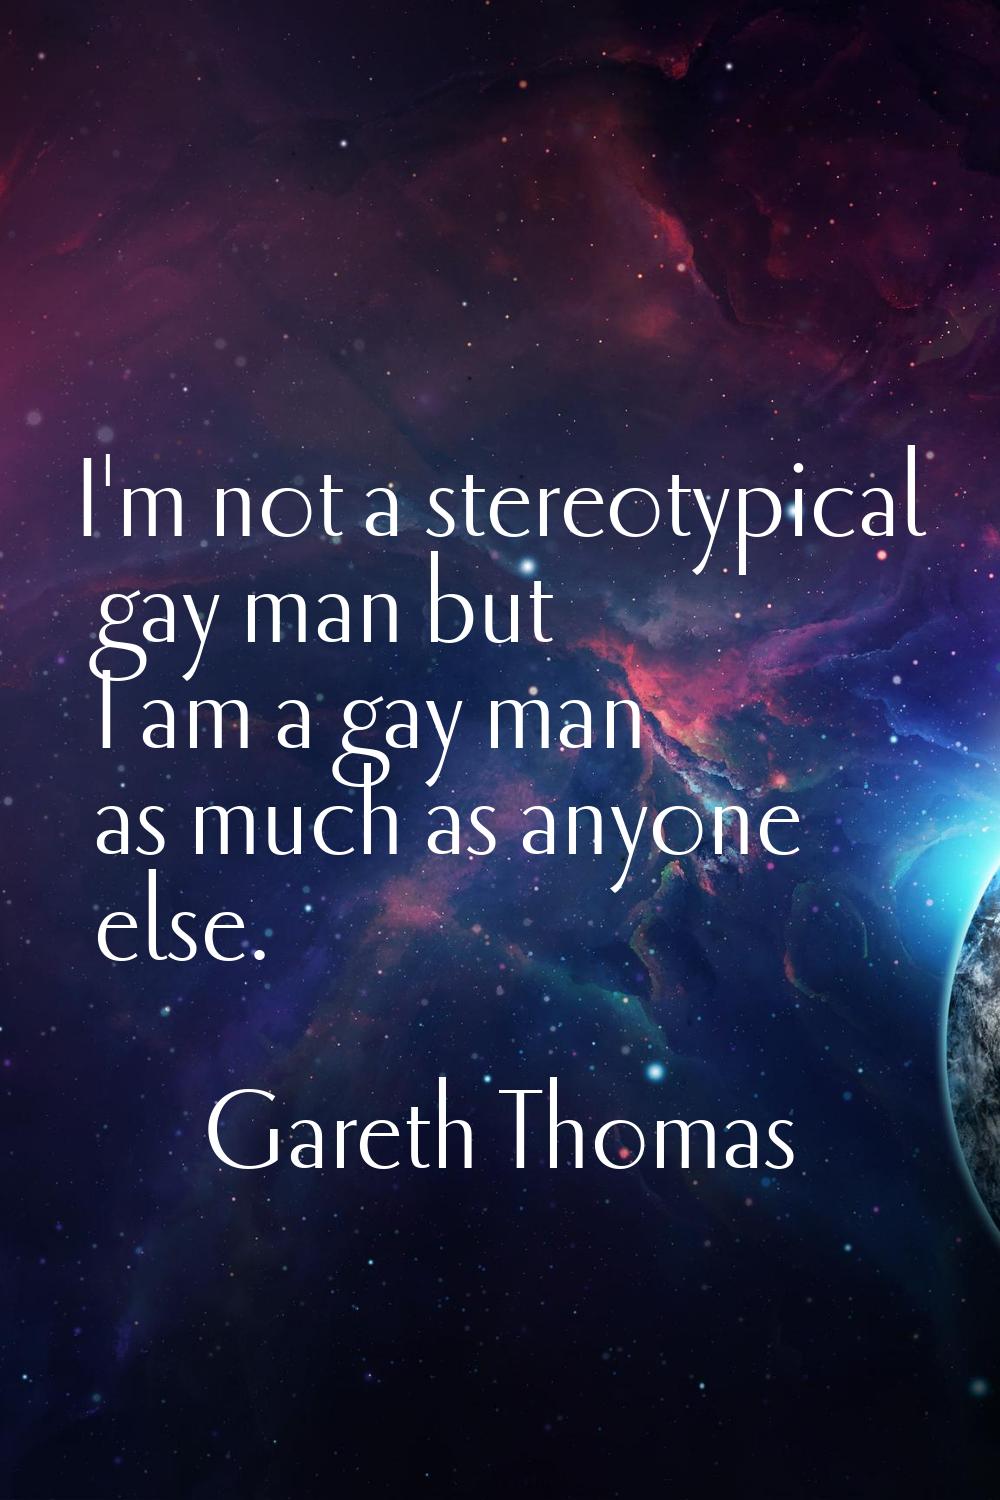 I'm not a stereotypical gay man but I am a gay man as much as anyone else.